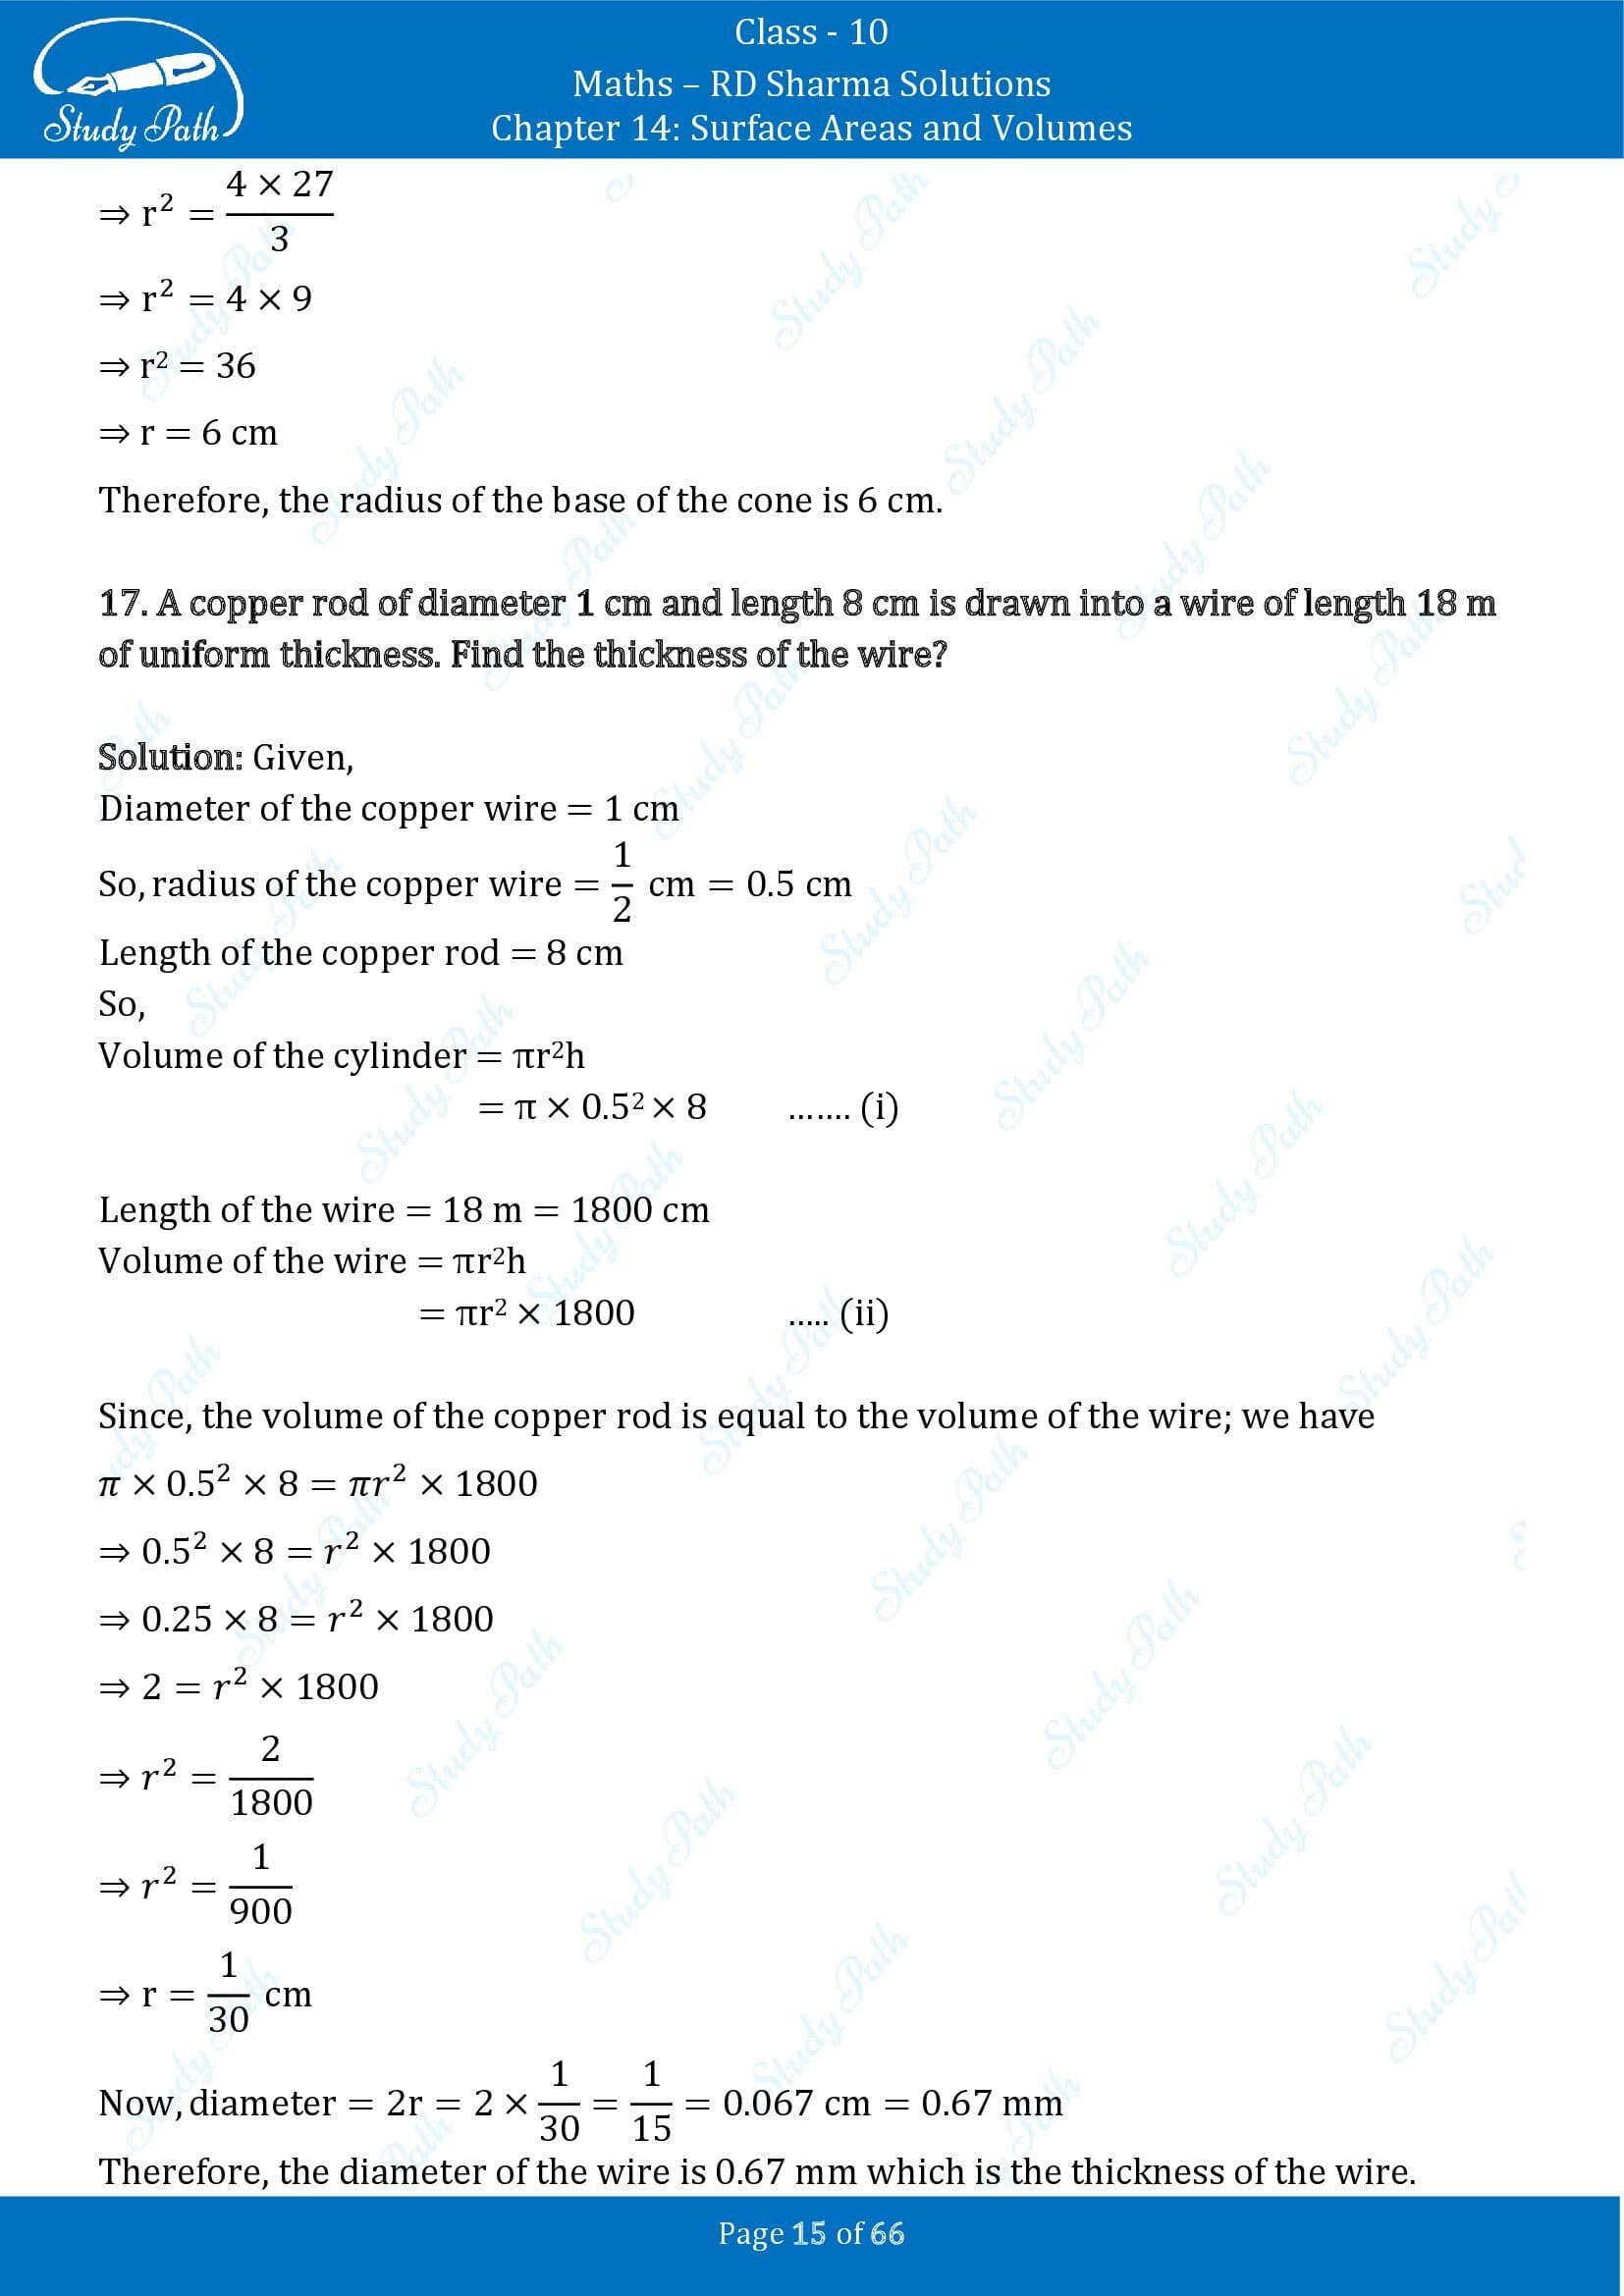 RD Sharma Solutions Class 10 Chapter 14 Surface Areas and Volumes Exercise 14.1 00015